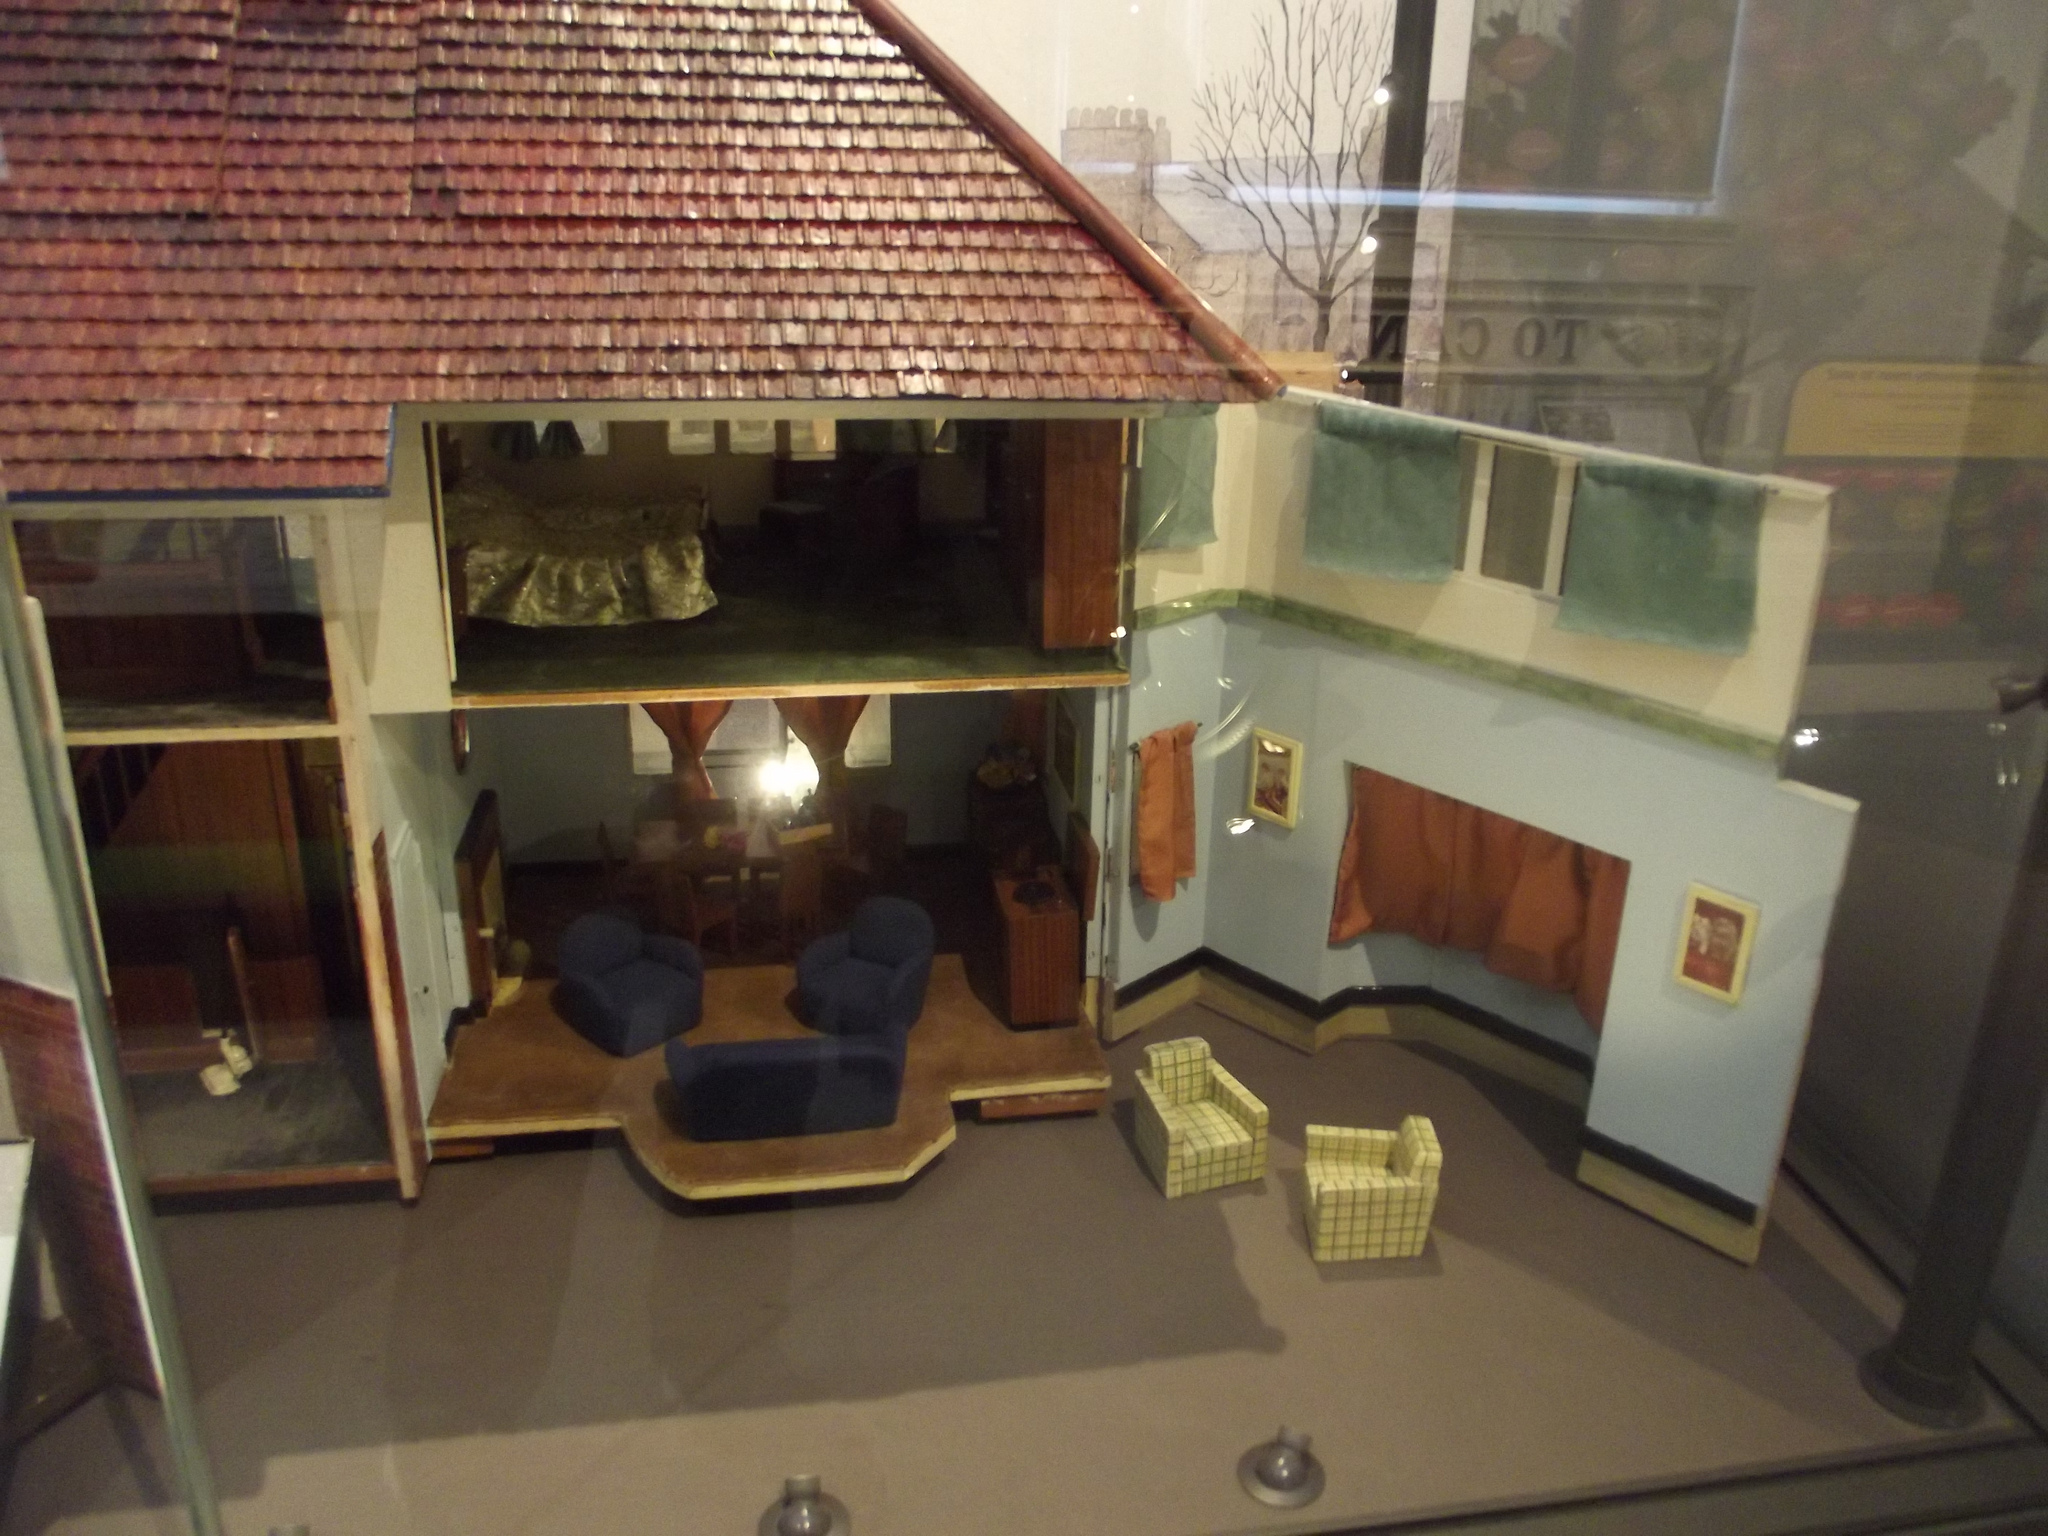 A doll's house with it's front wall opened up to show the contents